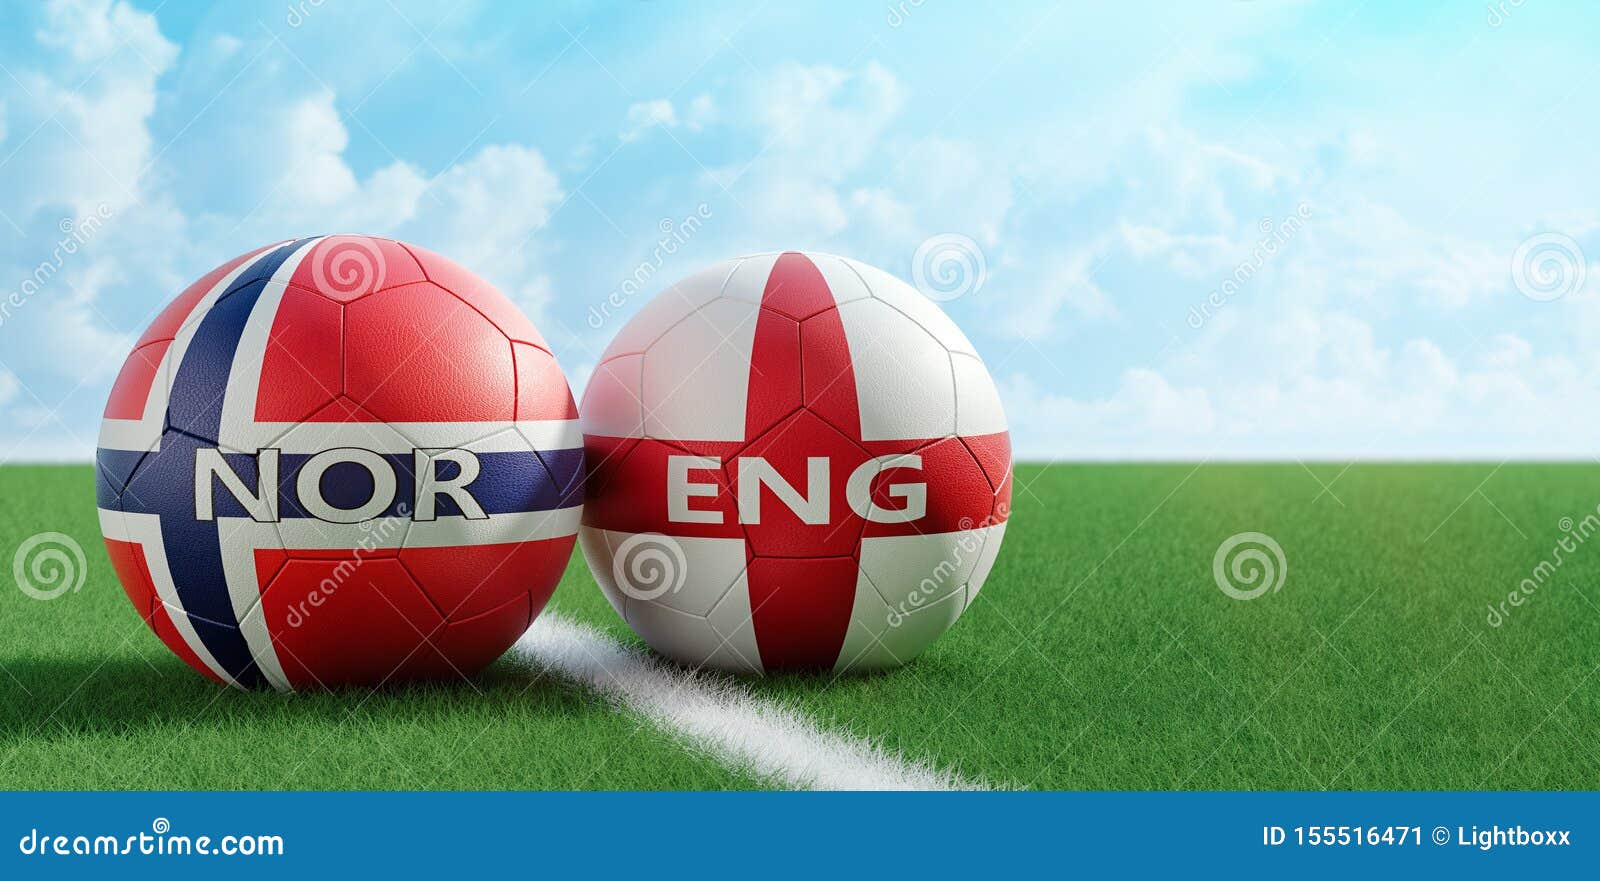 norway vs. england soccer match - soccer balls in norways and englands national colors on a soccer field.